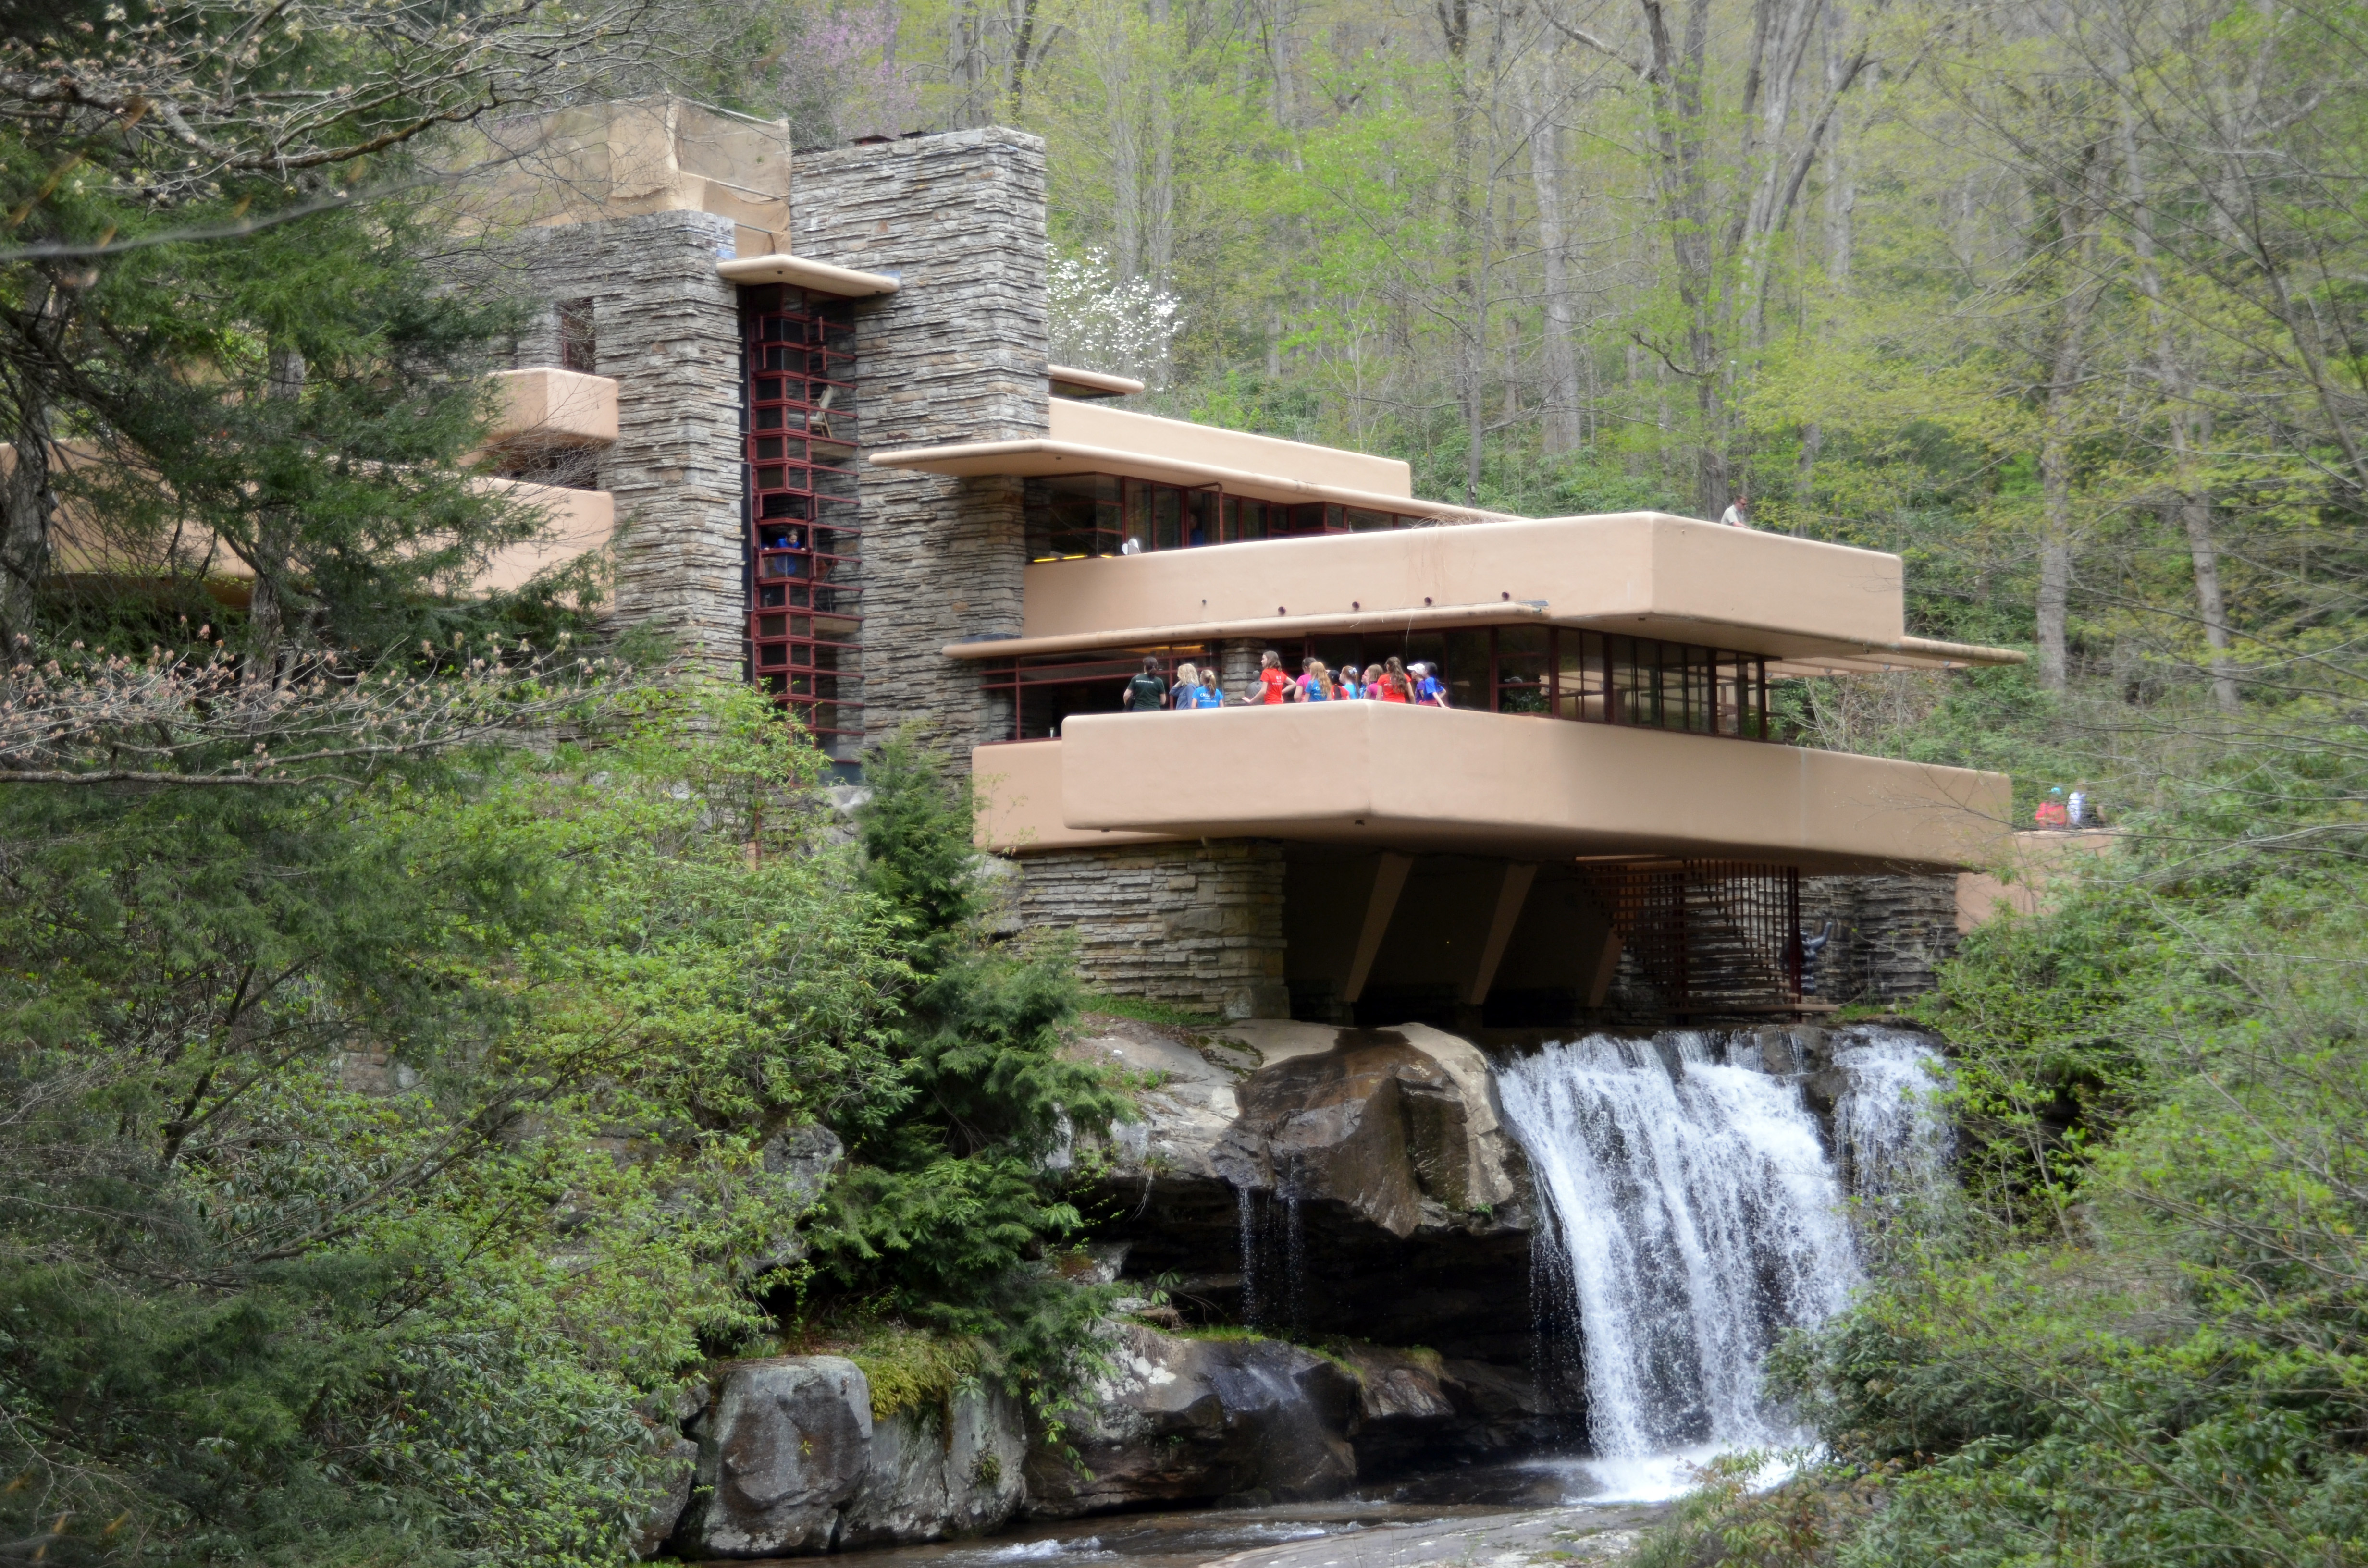 The Fallingwater House — Pennsylvania, USA | Source: Getty Images